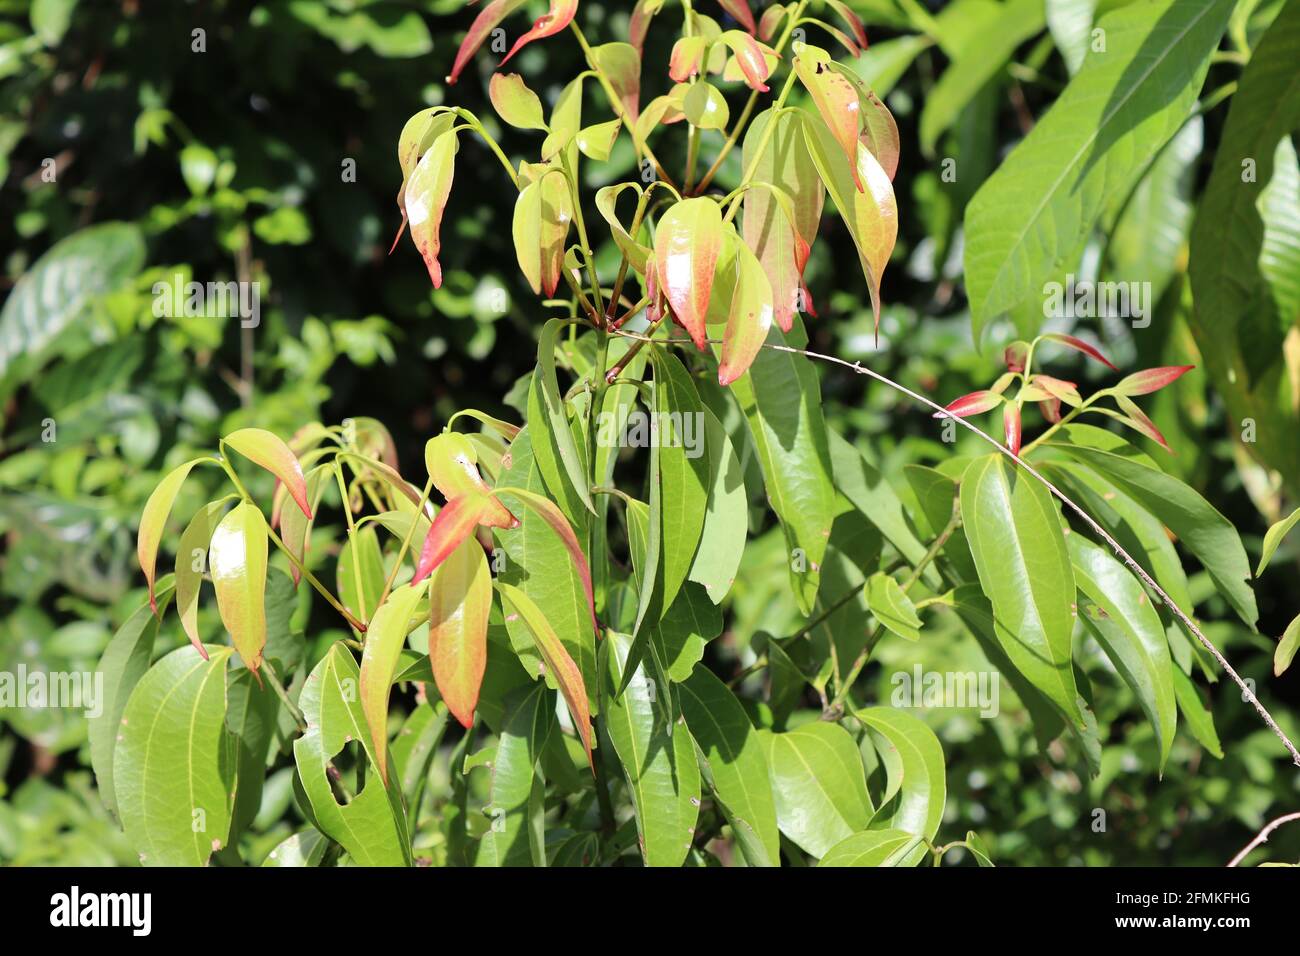 Sri Lankan cinnamon, very famous for spice, this cinnamon tree in the sun with full of green leaves. Stock Photo